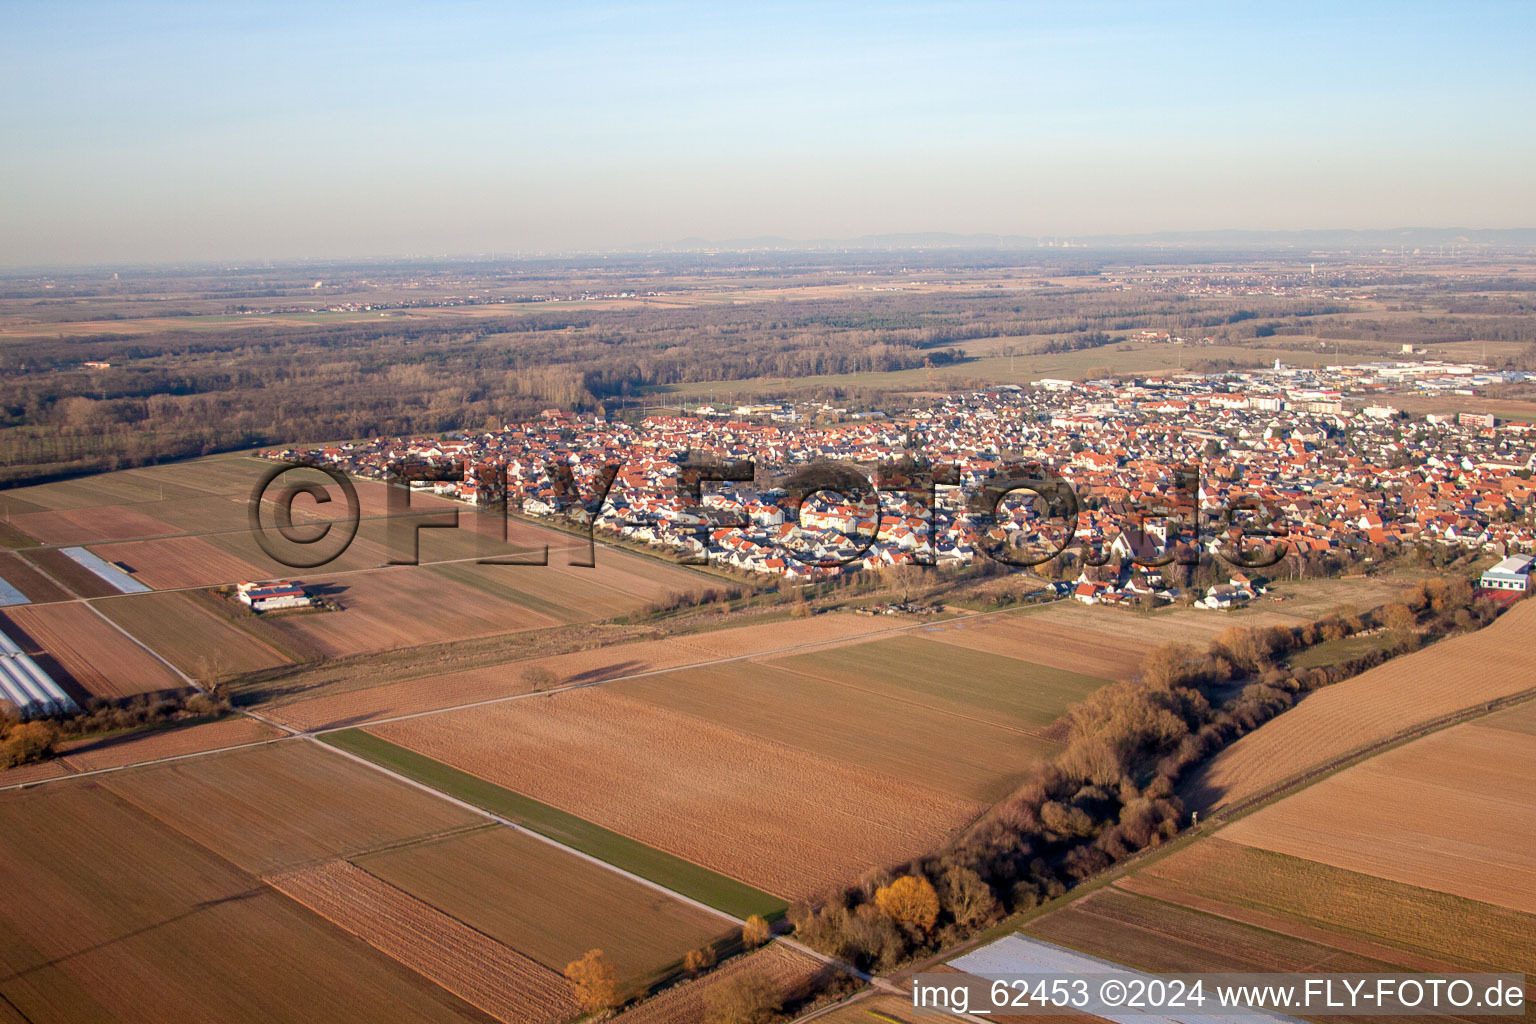 Offenbach an der Queich in the state Rhineland-Palatinate, Germany from the drone perspective